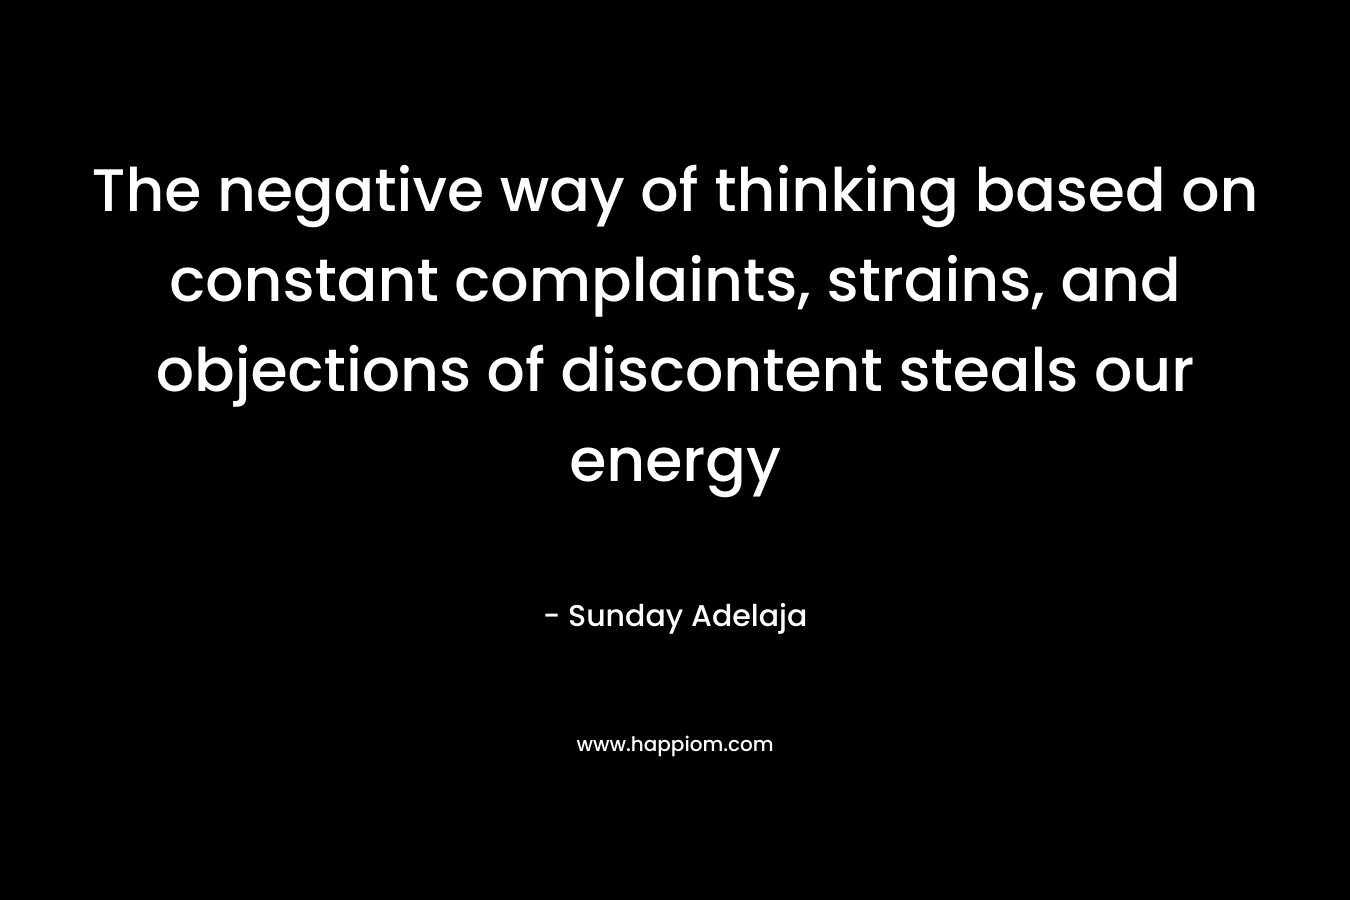 The negative way of thinking based on constant complaints, strains, and objections of discontent steals our energy